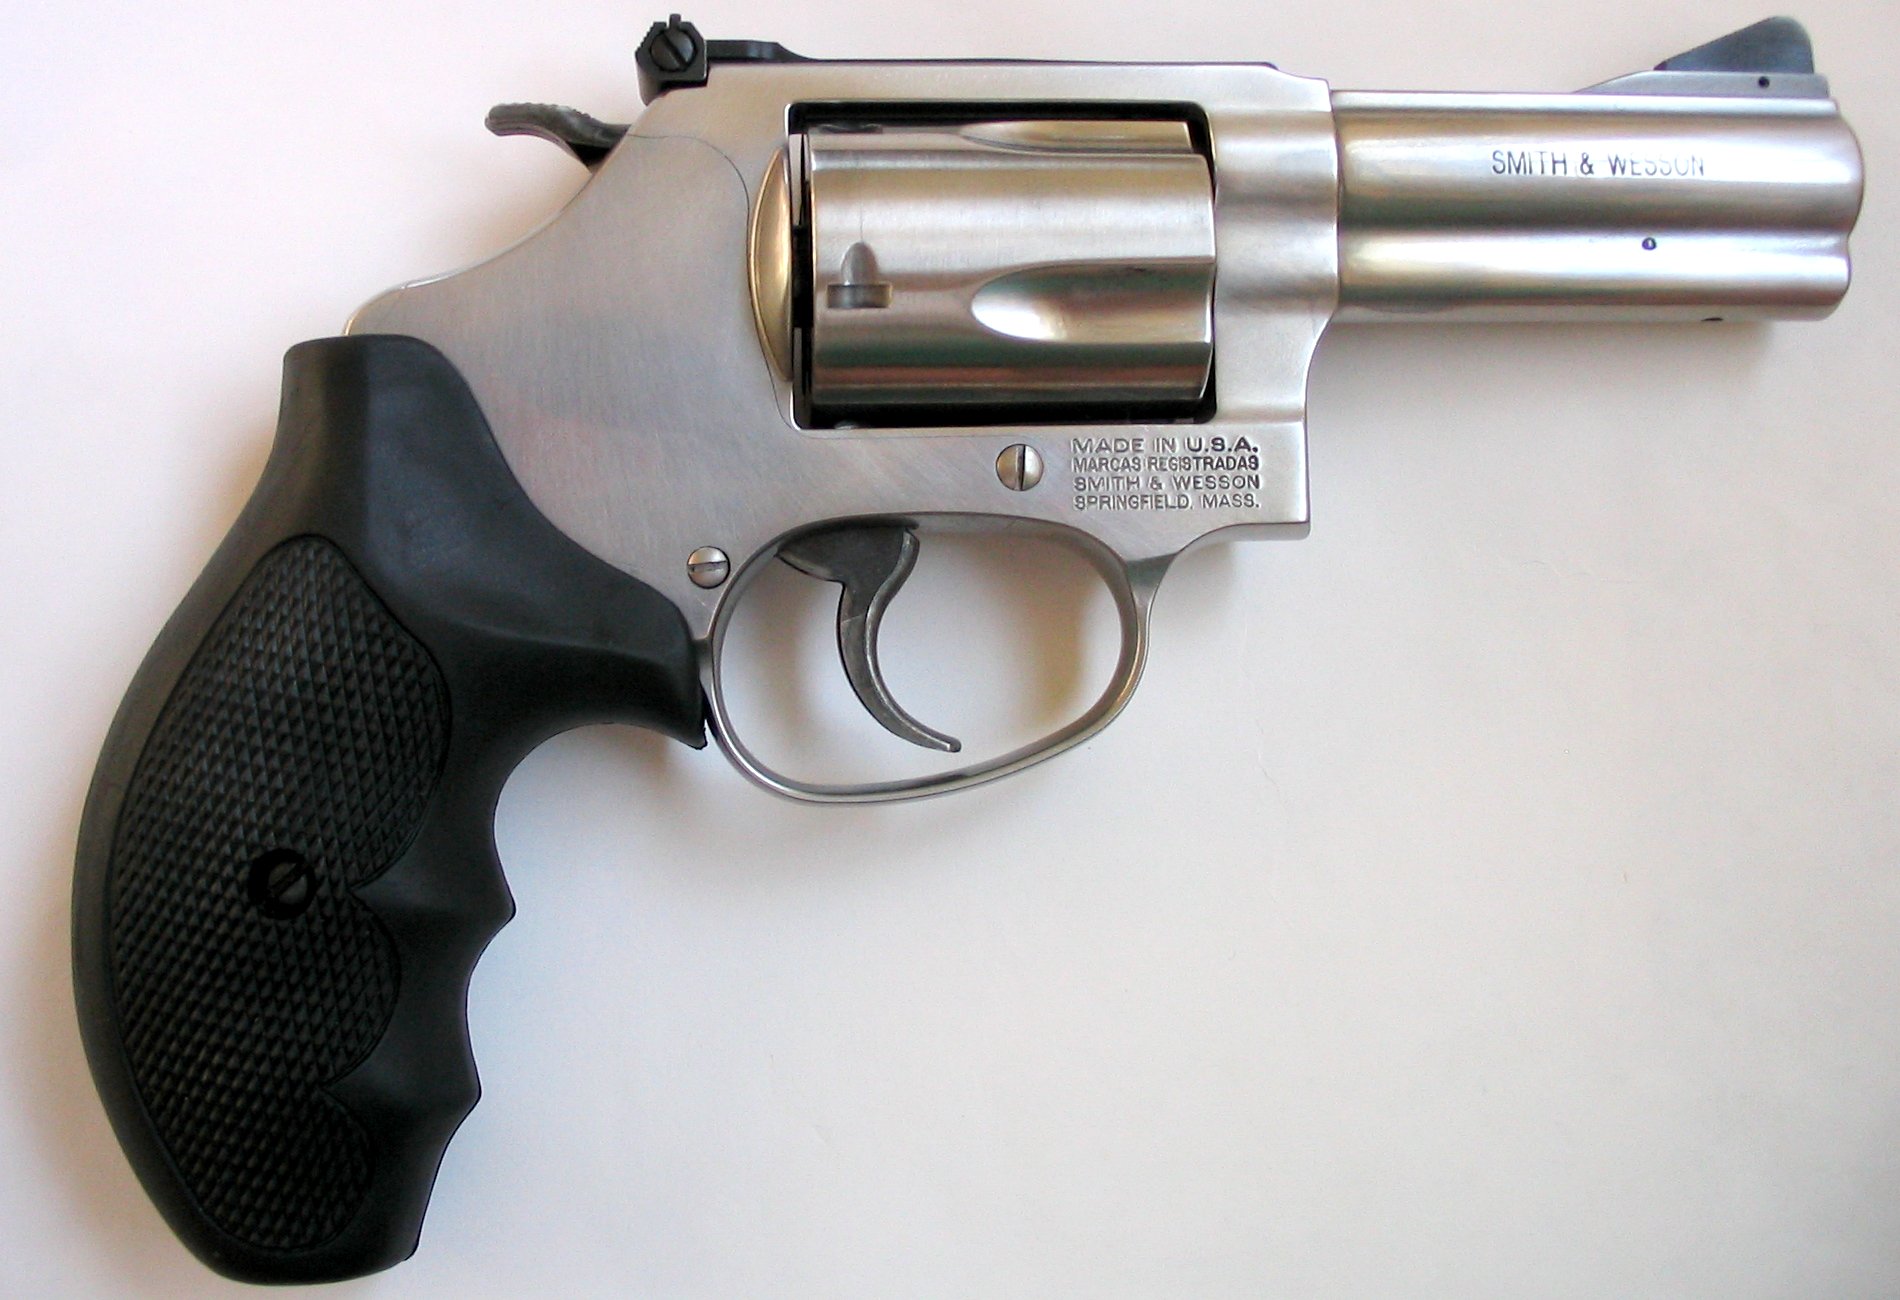 SMITH & WESSON .38 CHIEFS SPECIAL Stainless Revolver Model 60 Manual 